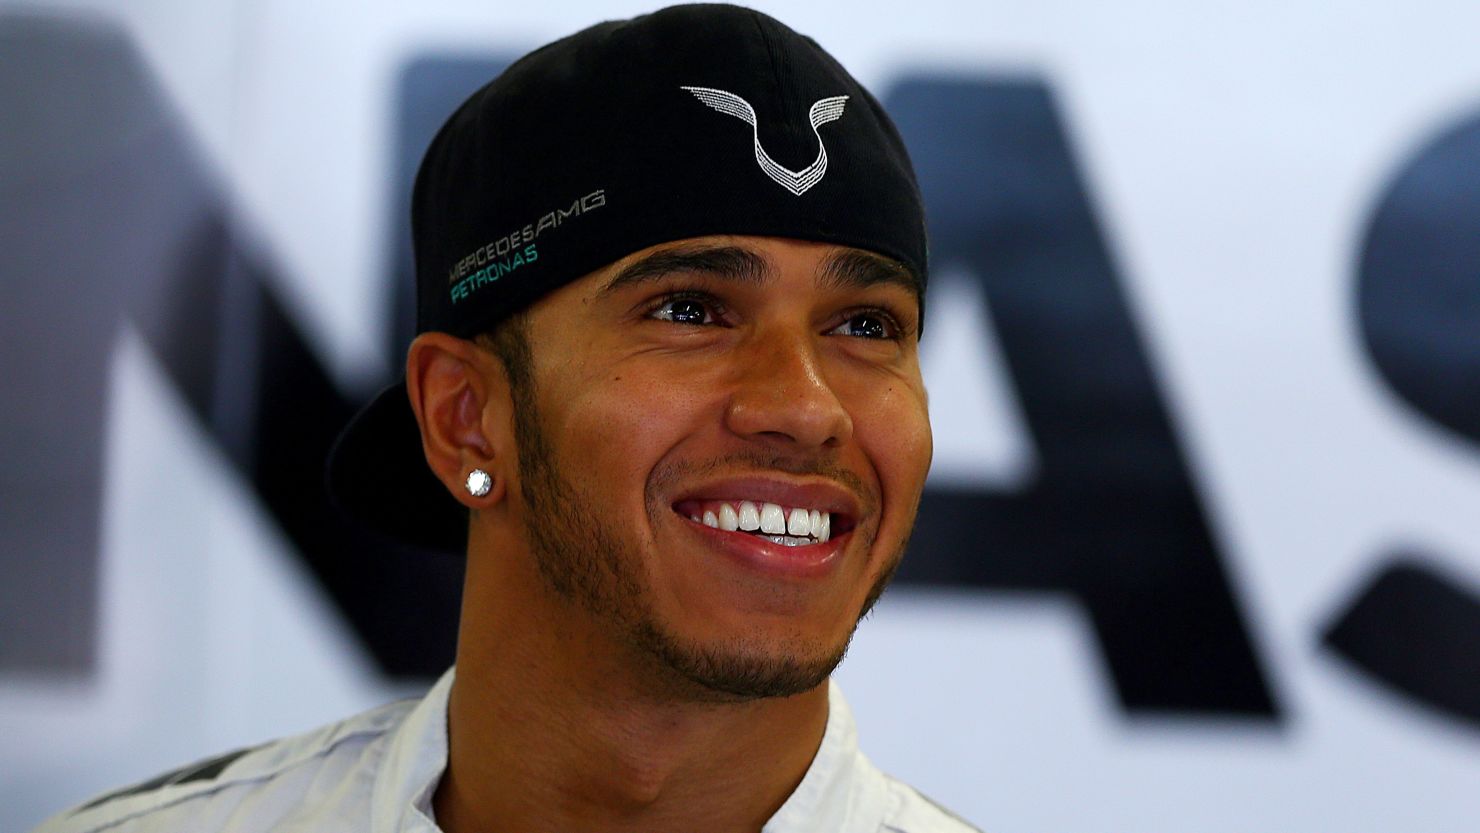  Lewis Hamilton smiles in the garage during final practice ahead of the Russian Formula One Grand Prix.